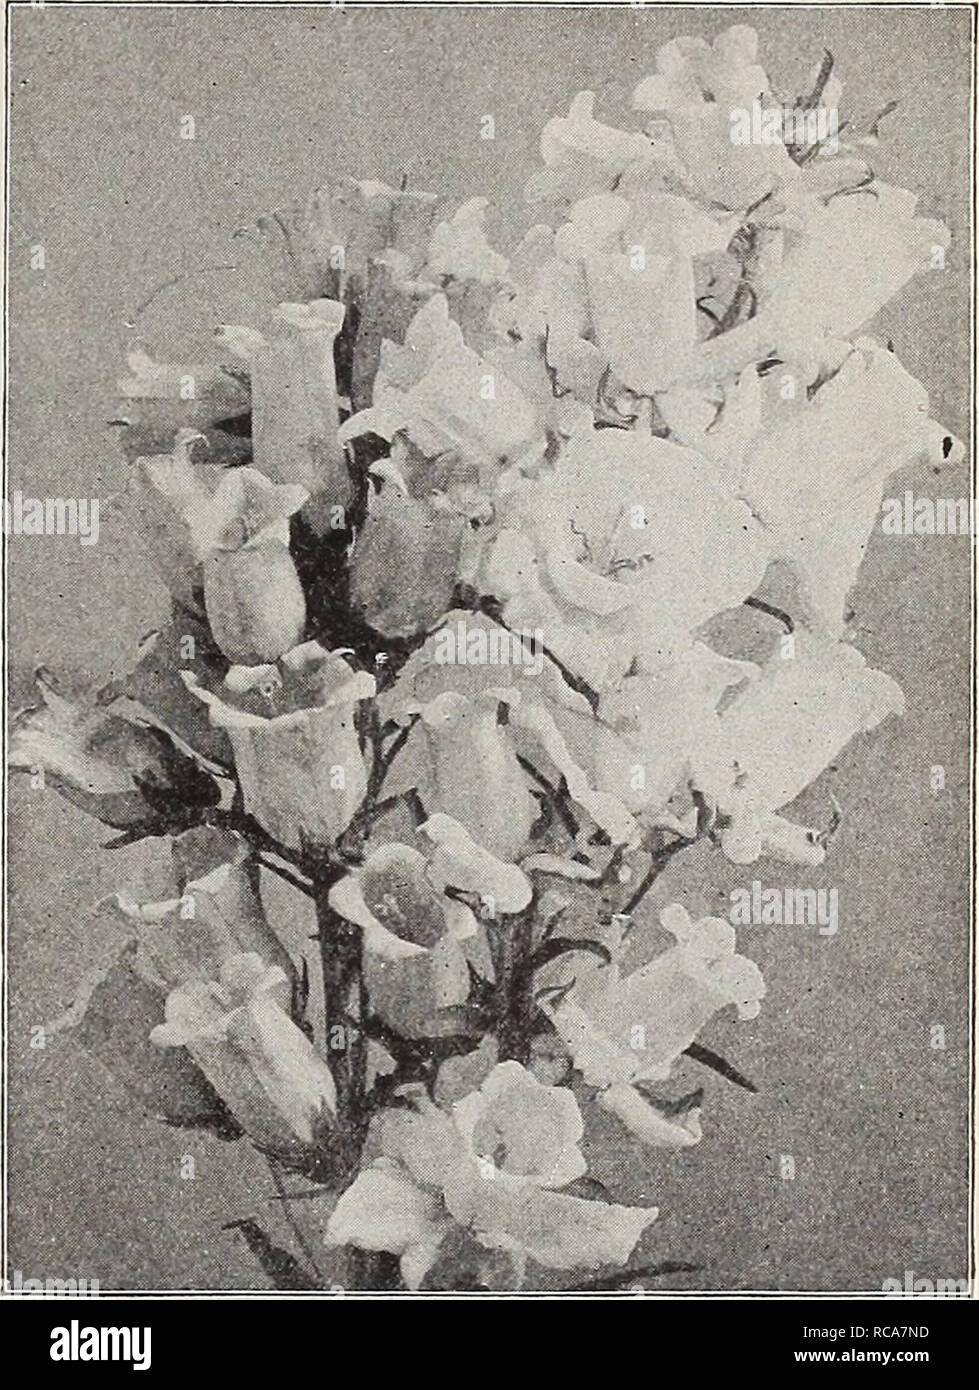 . Dreer's autumn catalogue 1911. Bulbs (Plants) Catalogs; Flowers Seeds Catalogs; Gardening Equipment and supplies Catalogs; Nurseries (Horticulture) Catalogs; Fruit Seeds Catalogs; Vegetables Seeds Catalogs. HENRTADREER â PHIlADftPHIA-^'A- Rf LIABLE f LOWER SEEDS 65 Campanula. (Bellflower.) Per Pkt. Carpatica {Carpathian Hare-Bell). In bloom the whole season; hardy perennial; blue; 6 inches. Per ^ oz., 25 cts 5 â Alba. White-flowered form. Per K oz.. 25 cts... 5 Latifolia Macreintha. A handsome variety, bearing in May and June large purplish-blue flowers; 3 feet 15 Persicifolia Grandiflora (P Stock Photo